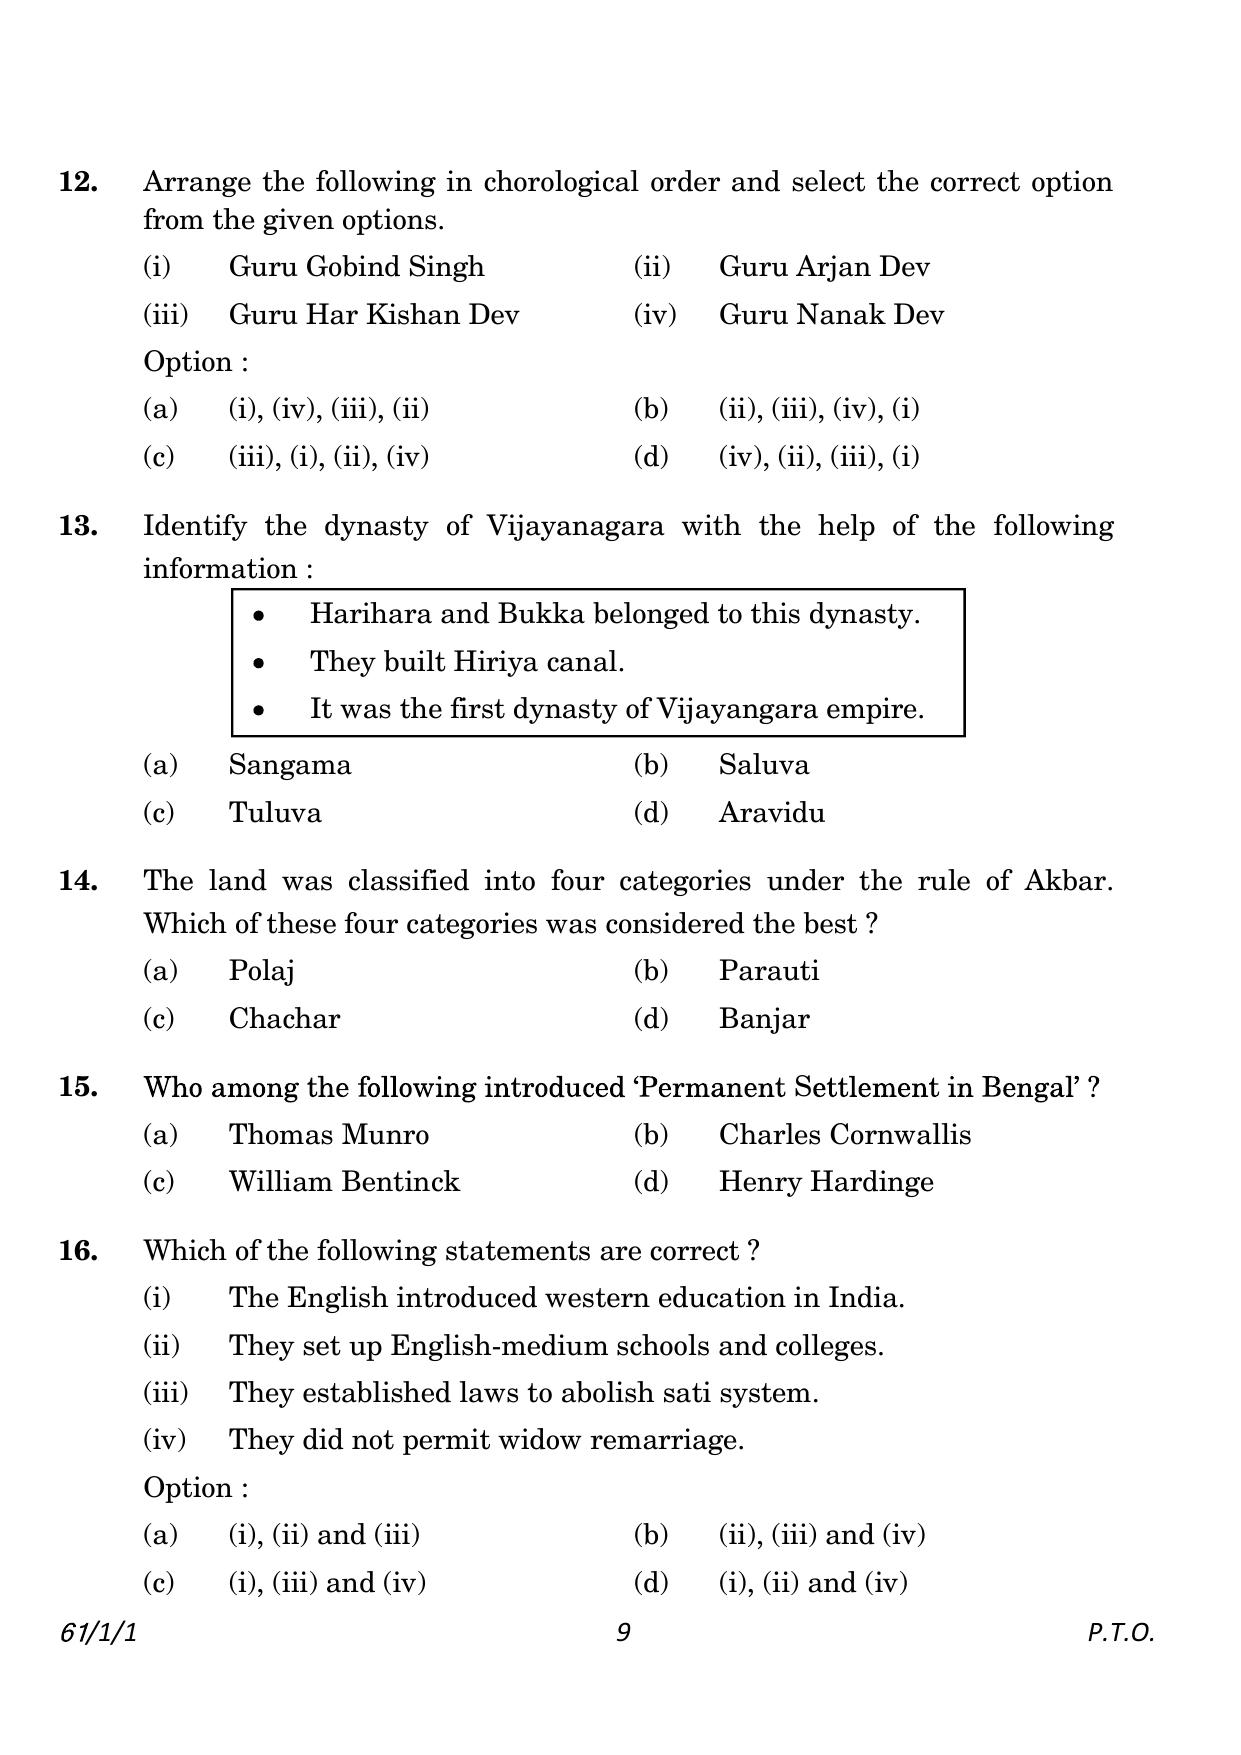 CBSE Class 12 61-1-1 History 2023 Question Paper - Page 9